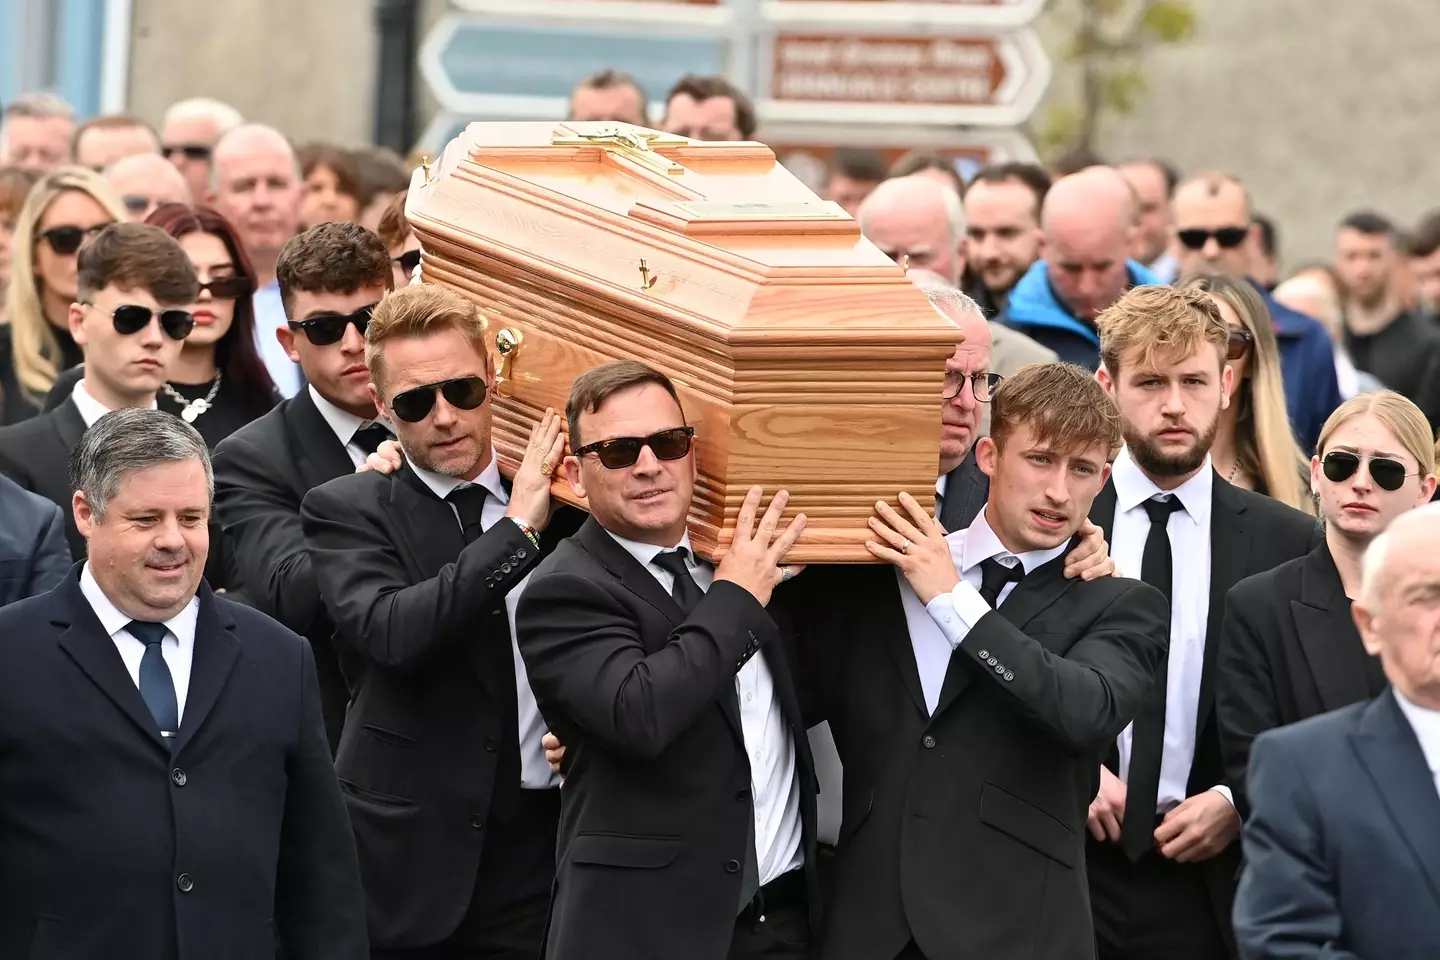 Ronan Keating spoke at his brother's funeral in Ireland.